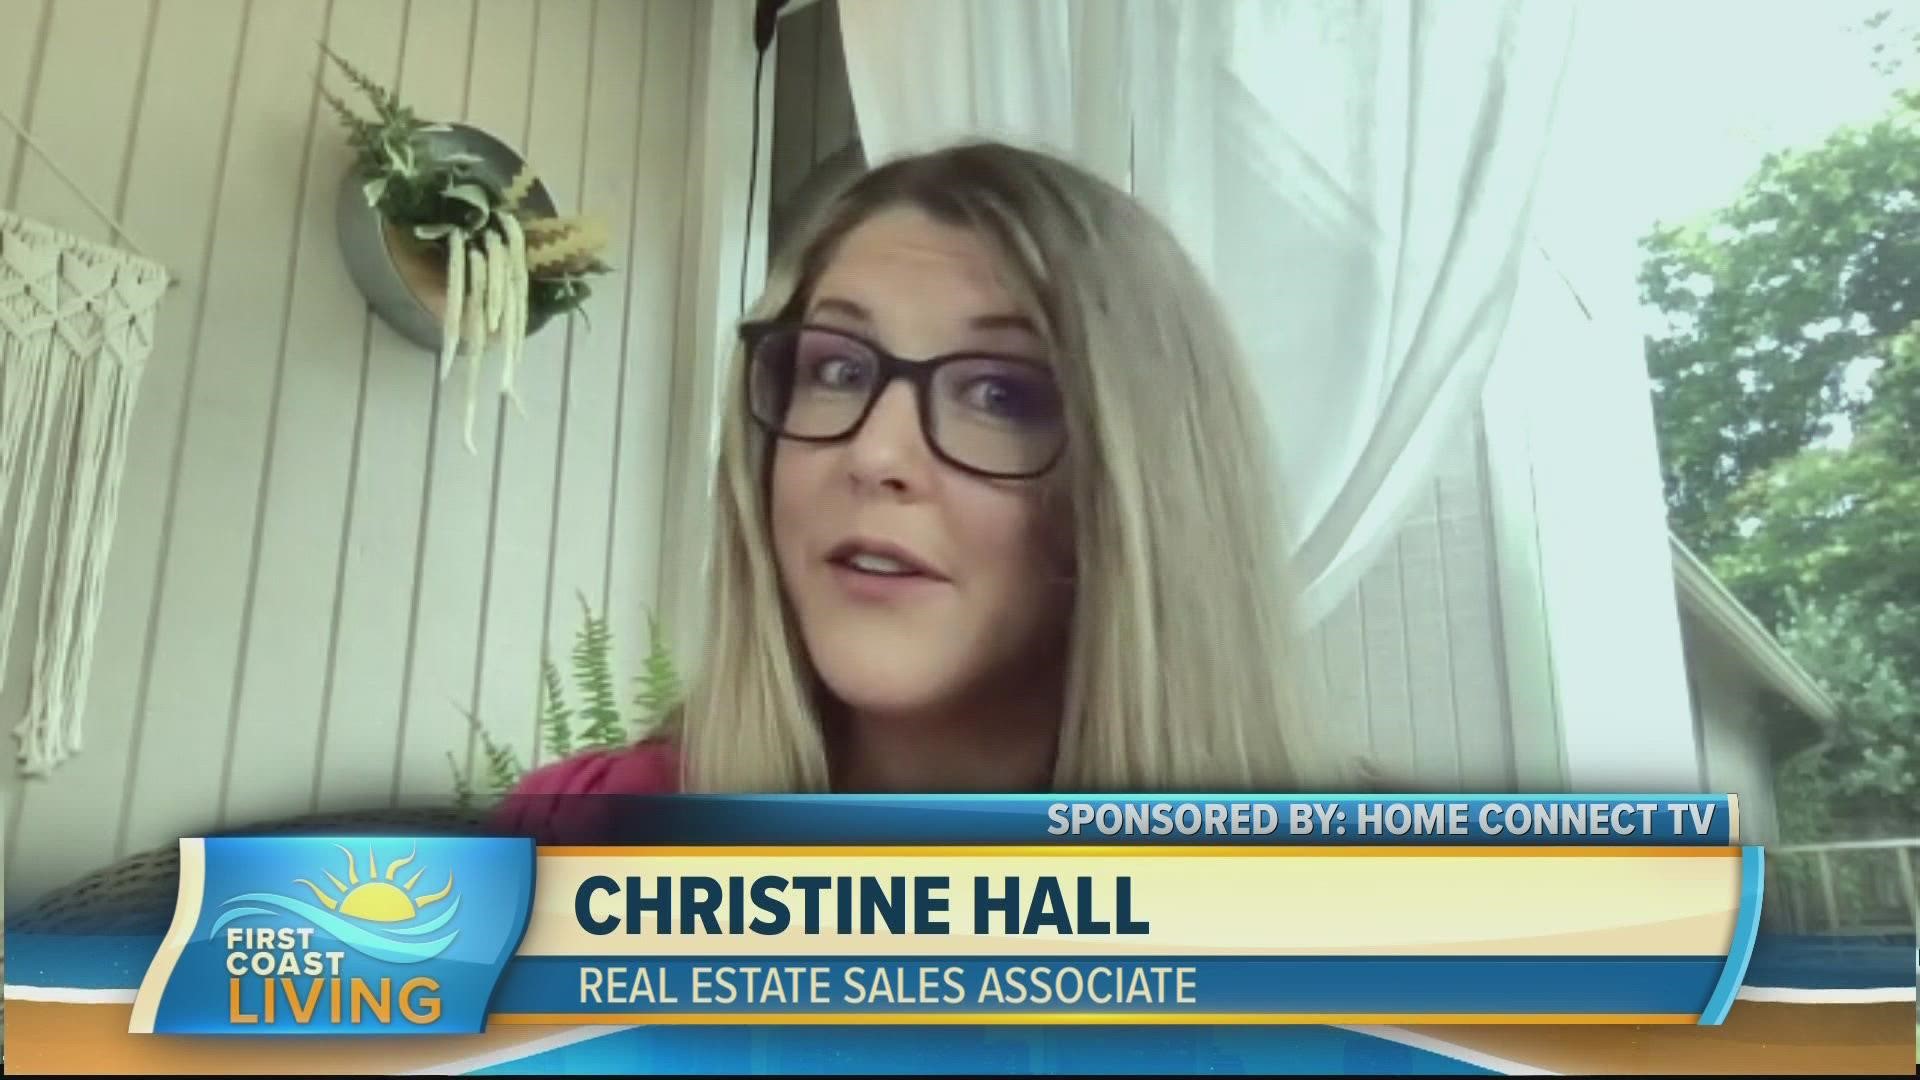 Christine Hall of Slate Real Estate one of our Home
Connect TV real estate experts has encouraging news for buyers in a market that shows signs of cooling down.